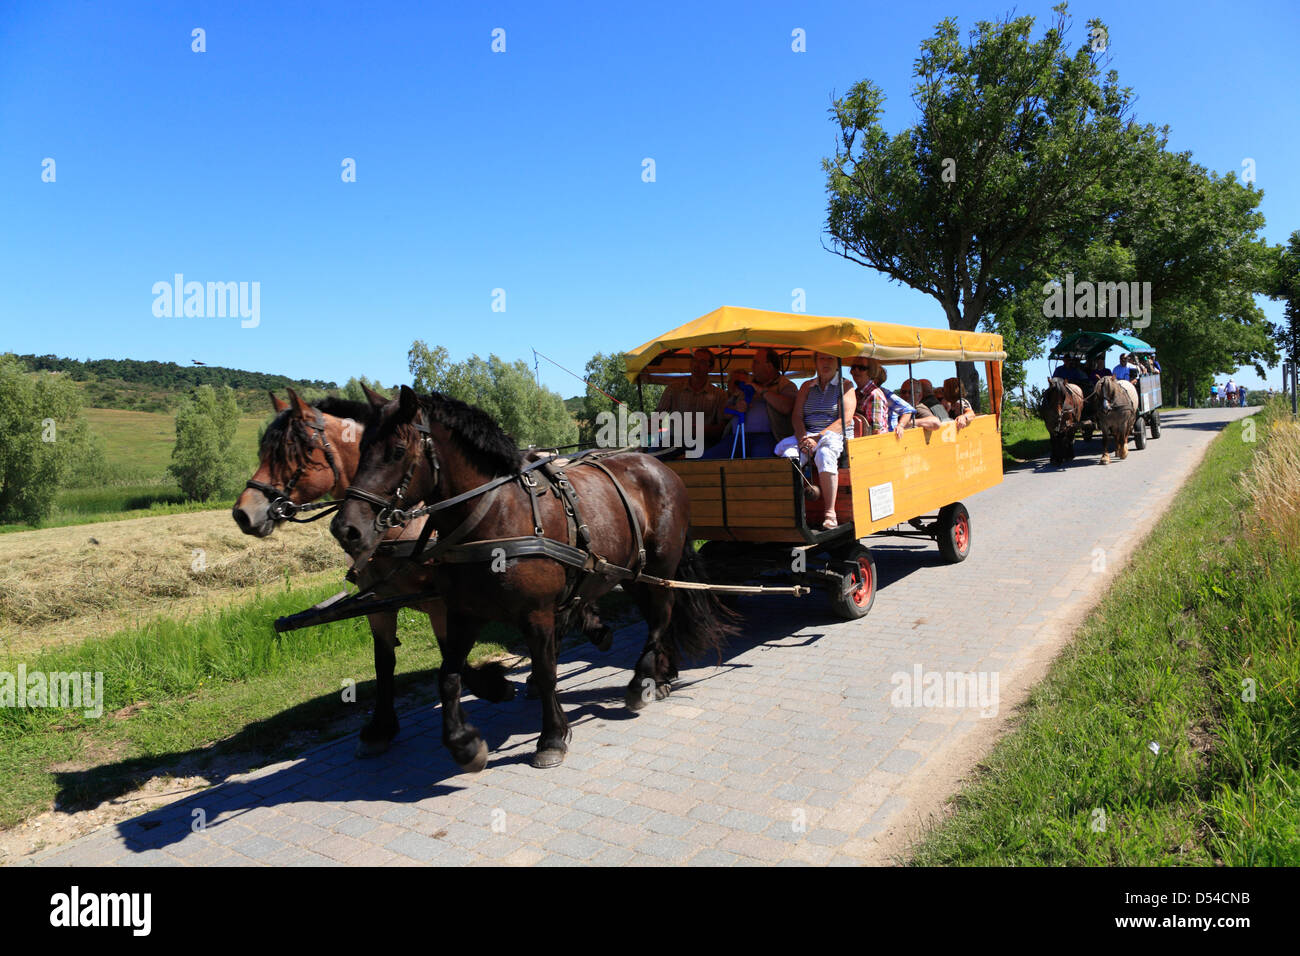 Hiddensee Island, horse-drawn carriages at Kloster, Mecklenburg Western Pomerania, Germany Stock Photo